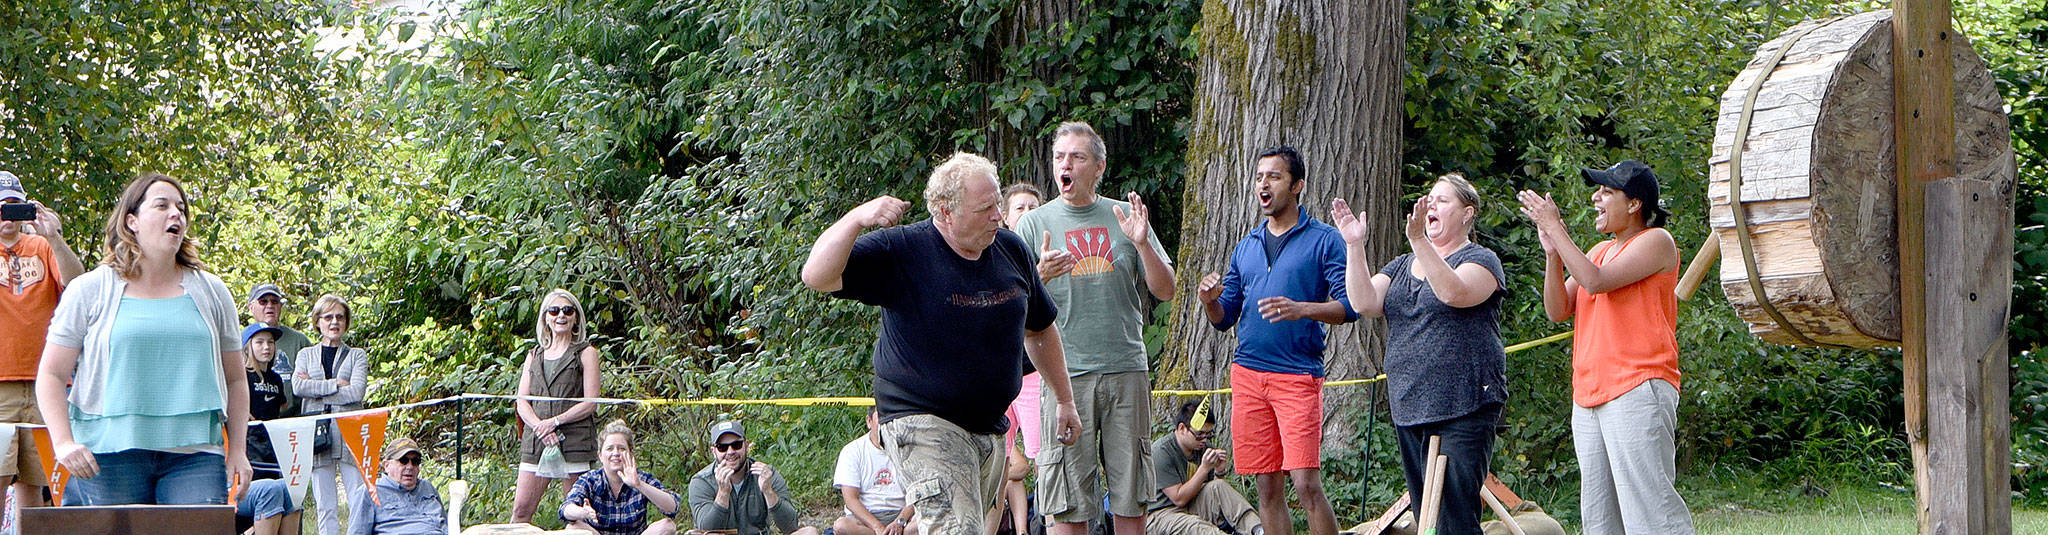 The crowd celebrates a near-perfect axe throw by a contestant Sunday during the timber sports demonstration in Sandy Cove Park.                                (Carol Ladwig/Staff Photo)